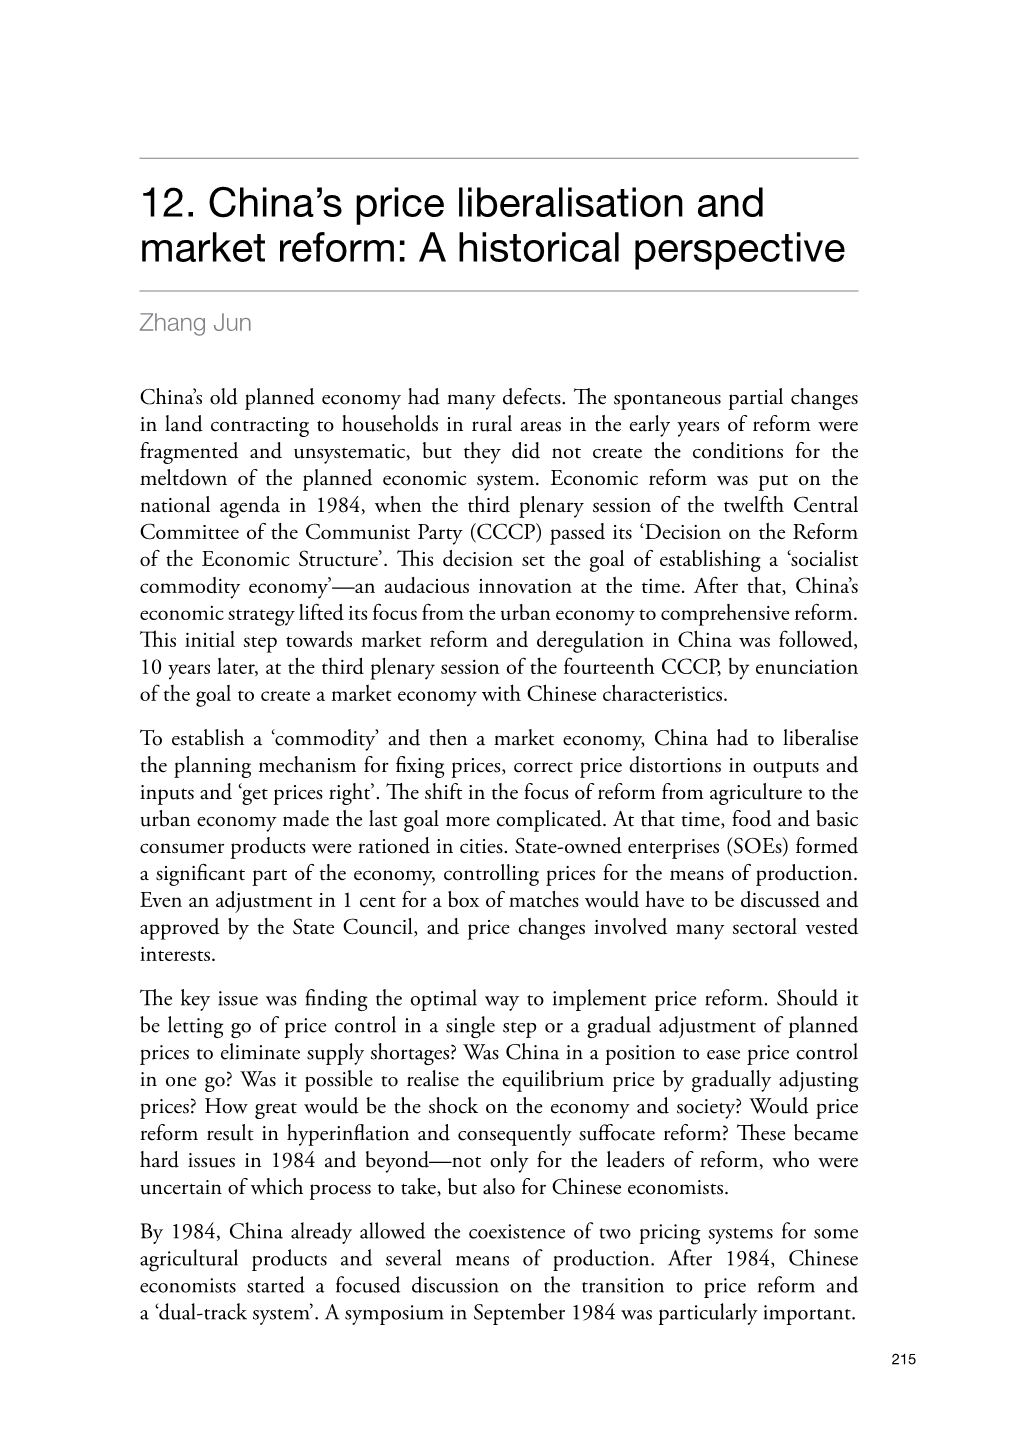 12. China's Price Liberalisation and Market Reform: a Historical Perspective